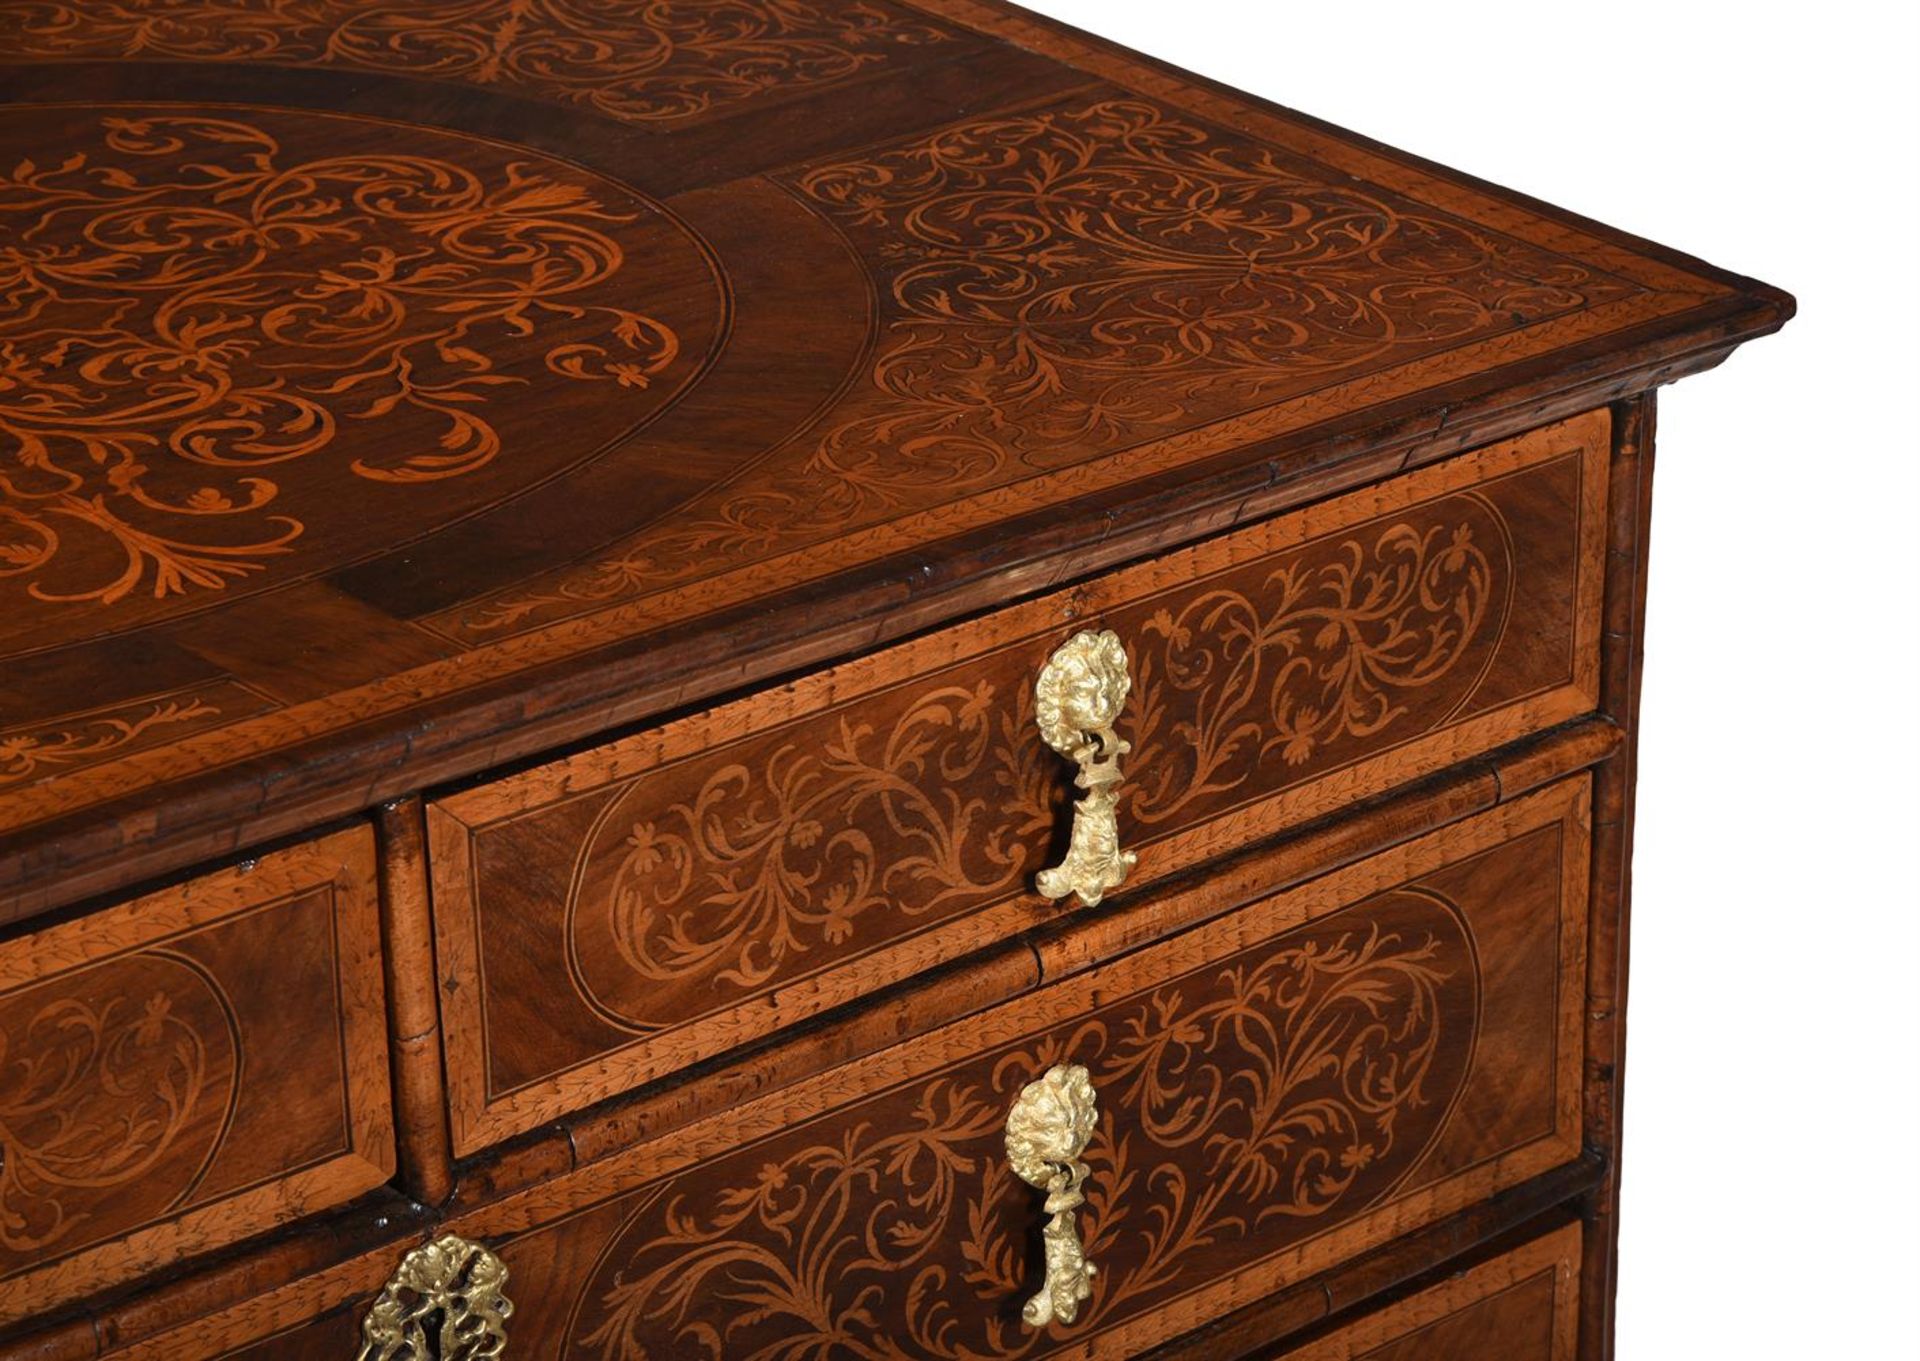 A FINE WILLIAM & MARY WALNUT AND SEAWEED MARQUETRY CHEST OF DRAWERS, CIRCA 1690 - Image 5 of 9